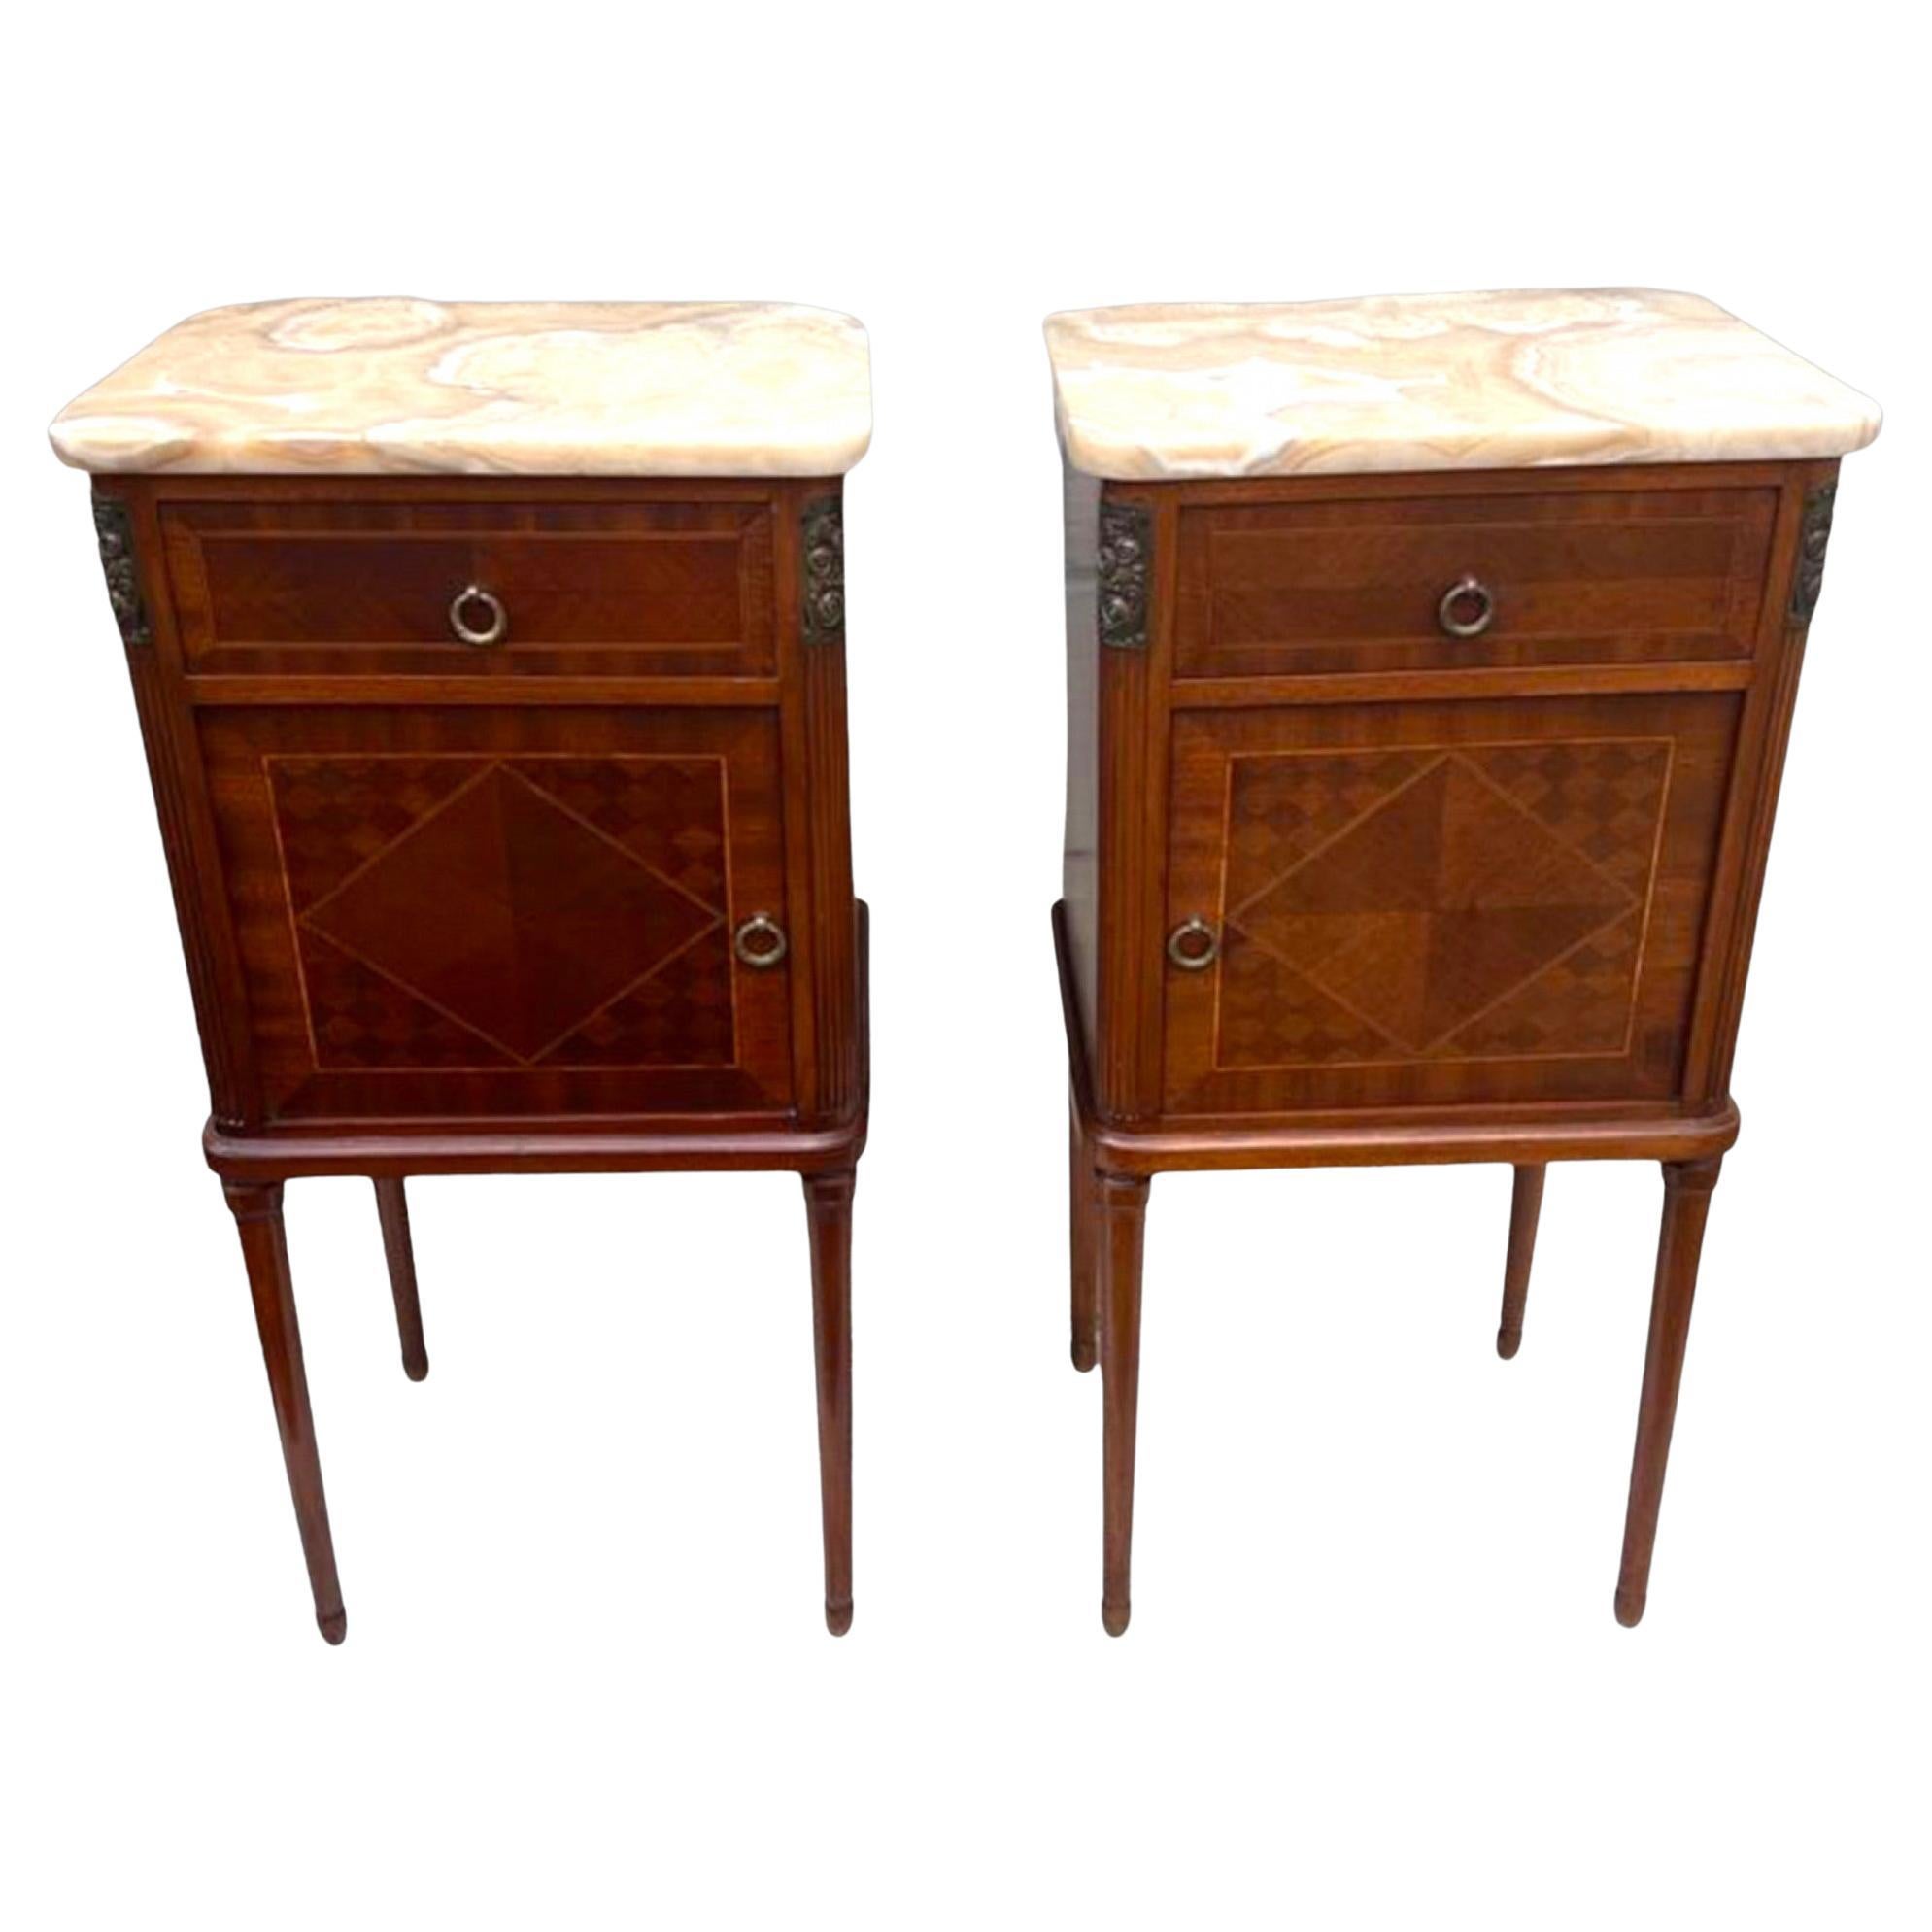 A Pair of French Inlaid Mahogany Bedside Tables